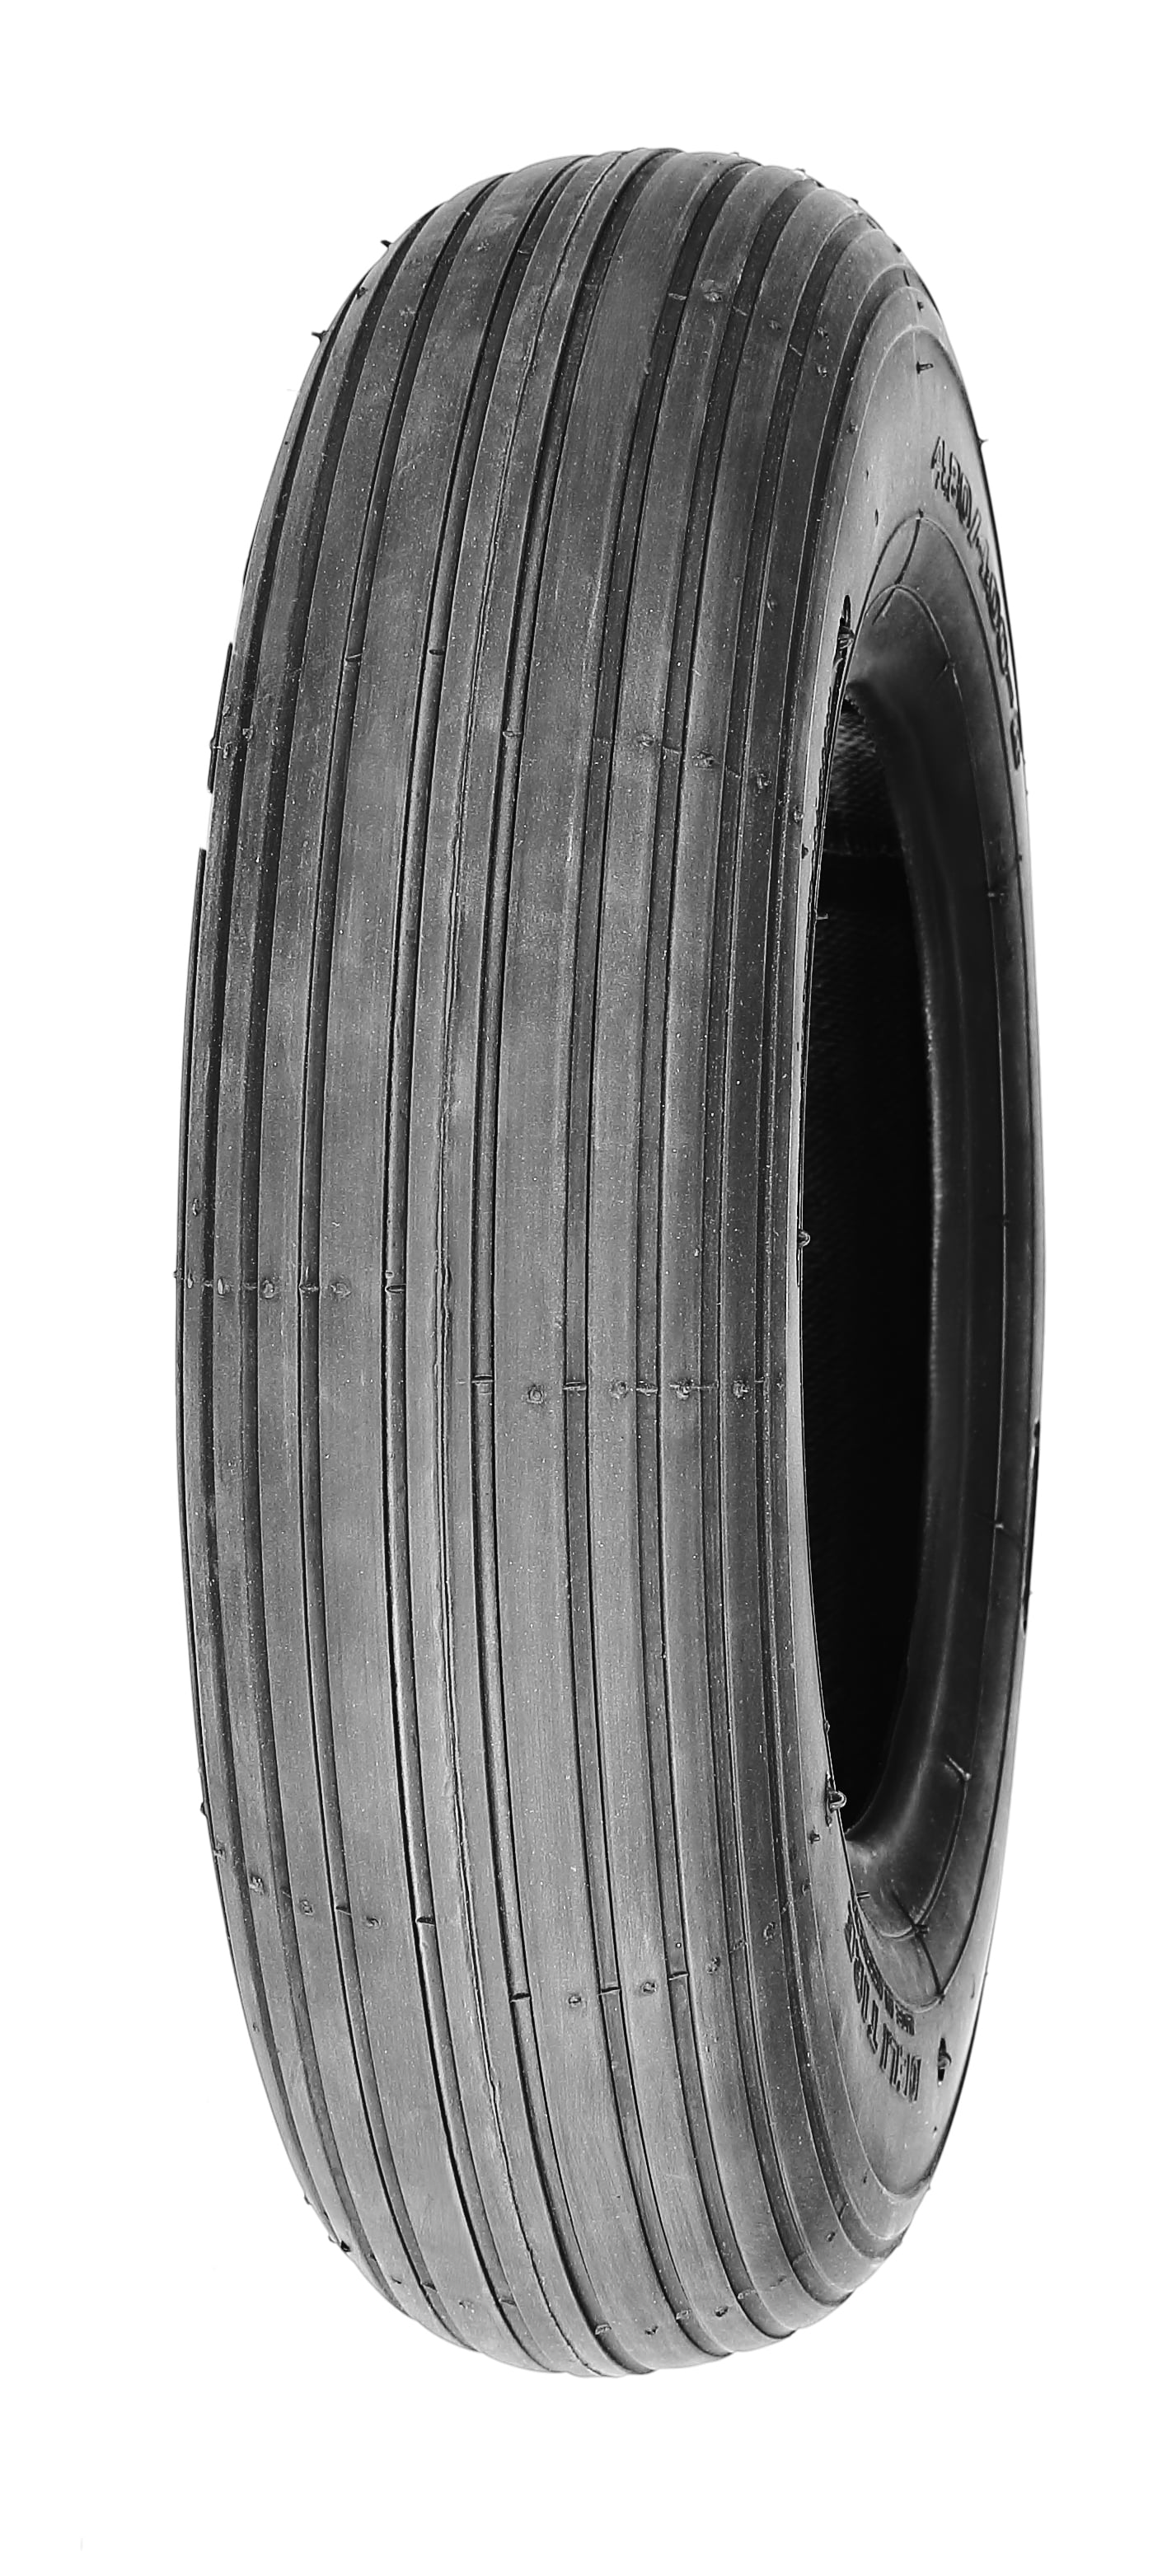 4.10/3.50-5 Tubeless 4 Ply Rated Sawtooth Rib Lawn Garden Tires Deli Tire Set of 2 Tires 